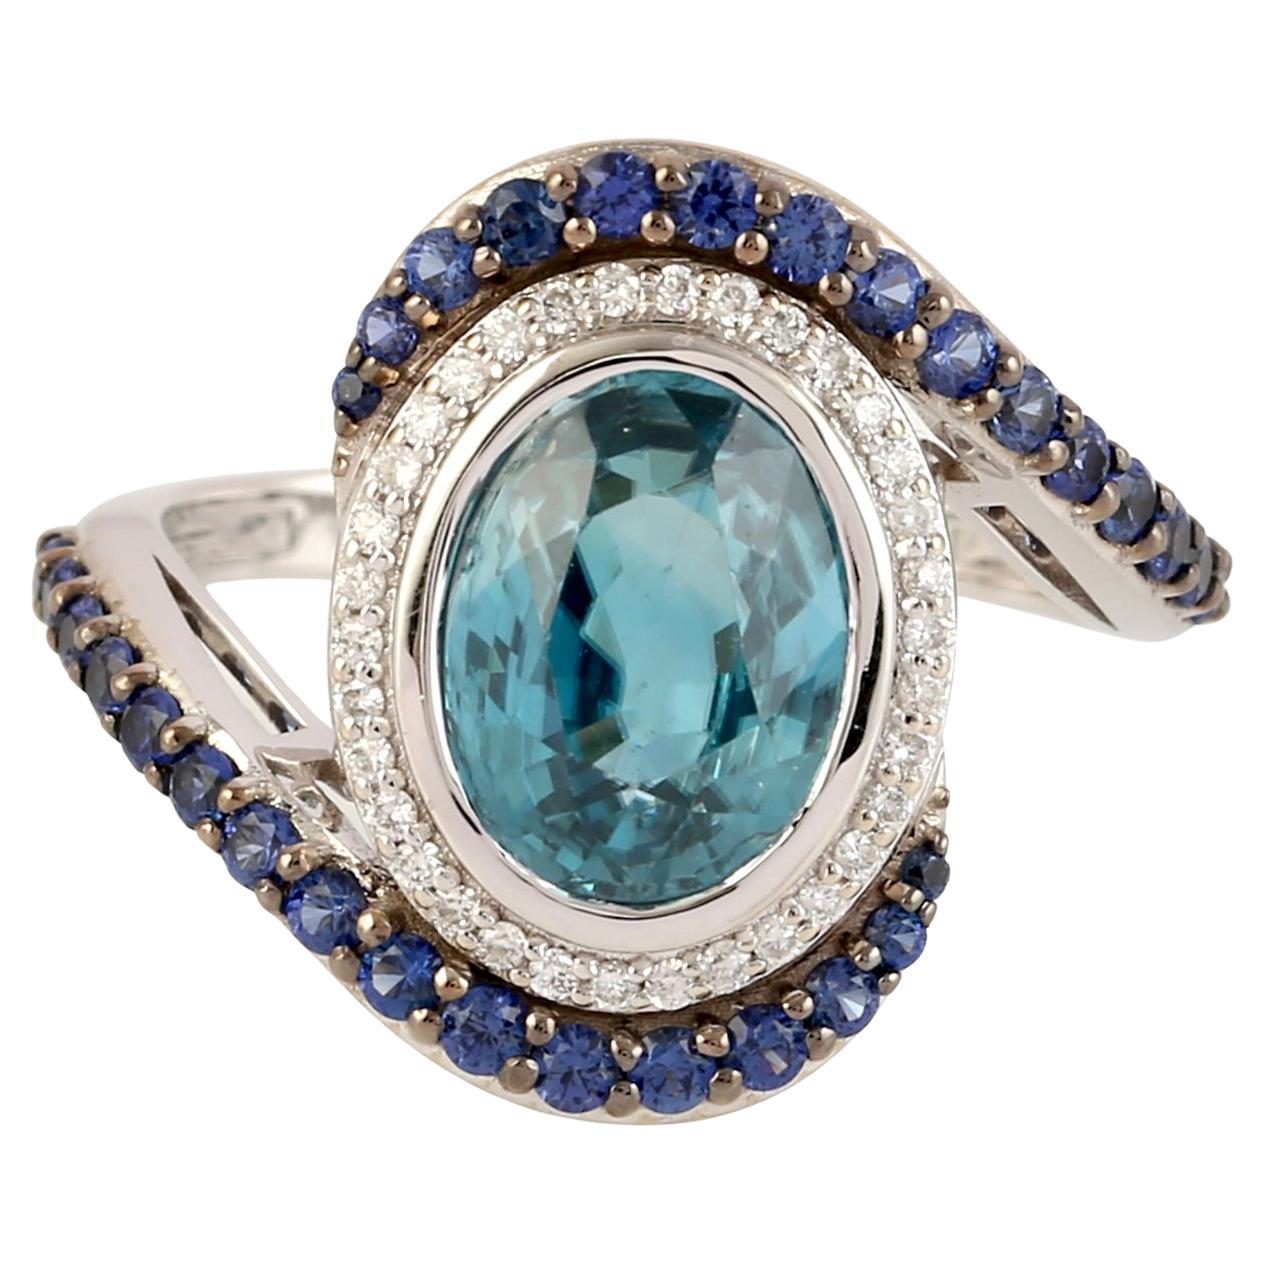 Blue Zircon & Sapphire Ring With Diamonds Made In 18k Gold